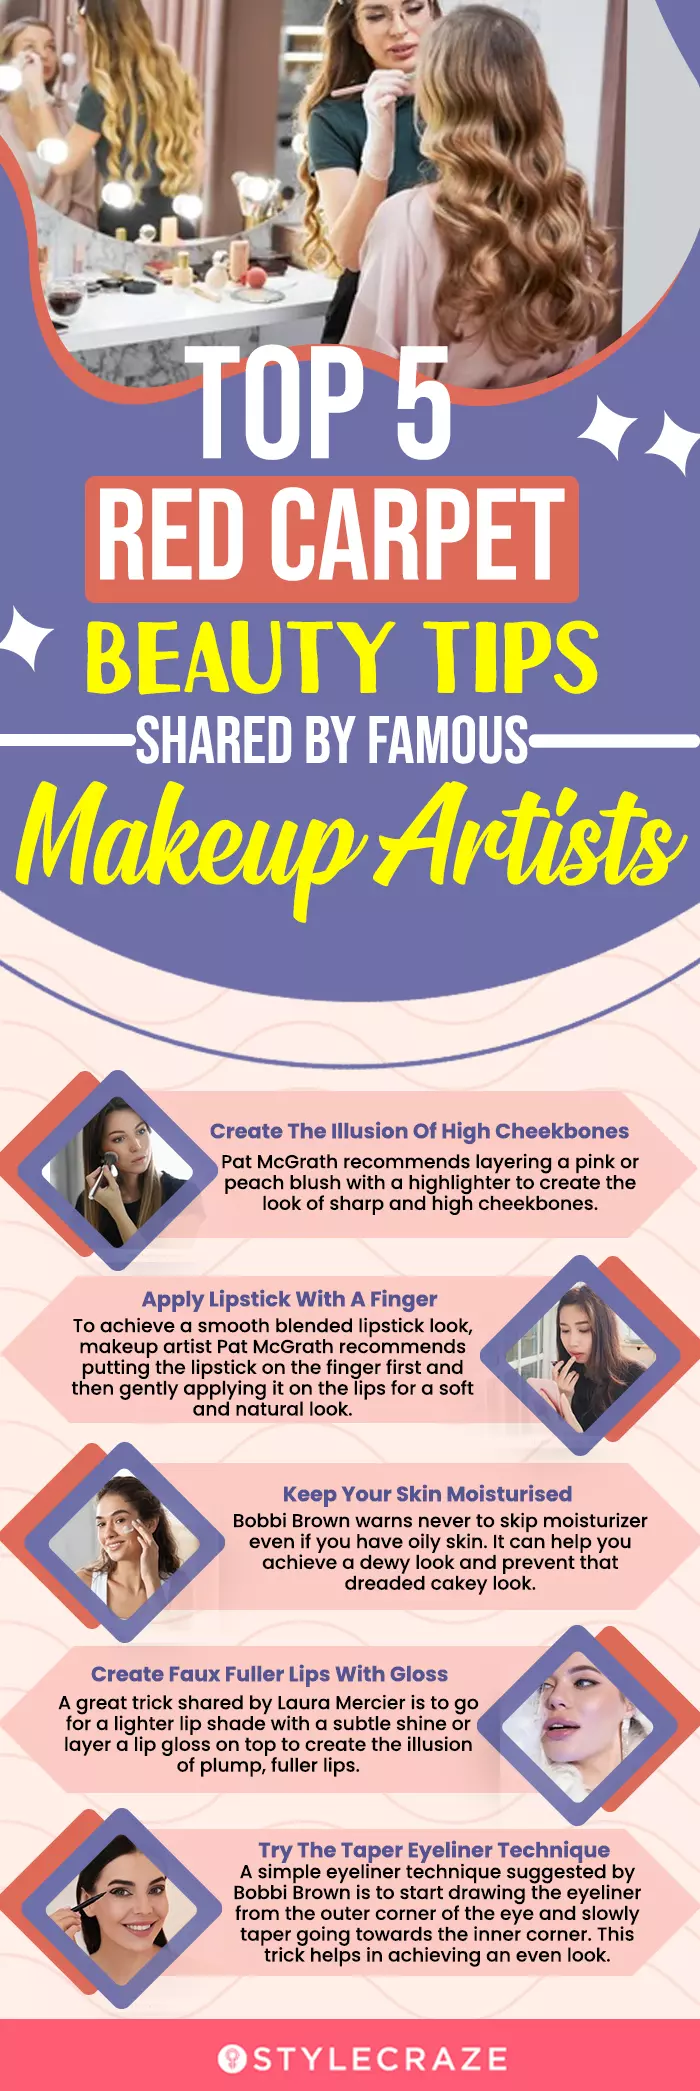 top 5 red carpet beauty tips shared by famous makeup artists (infographic)